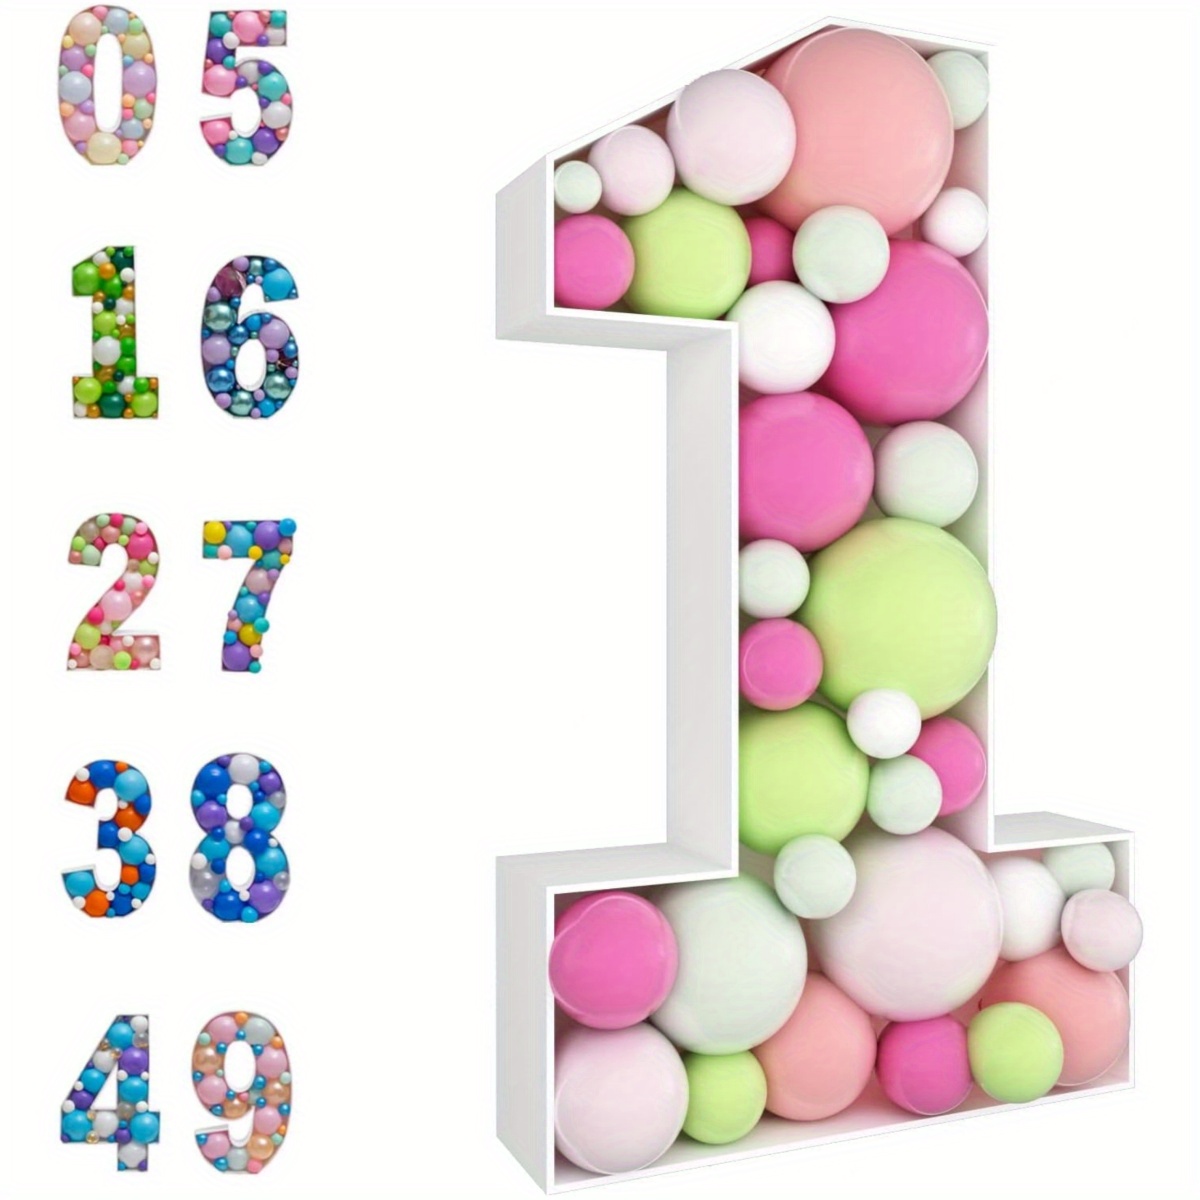 1pc, 28in Tall Mosaic Balloon Frame Pre-Cut Foam Board Big Marquee Letters DIY Kit For Birthday Party Wedding Backdrop Decor Letter